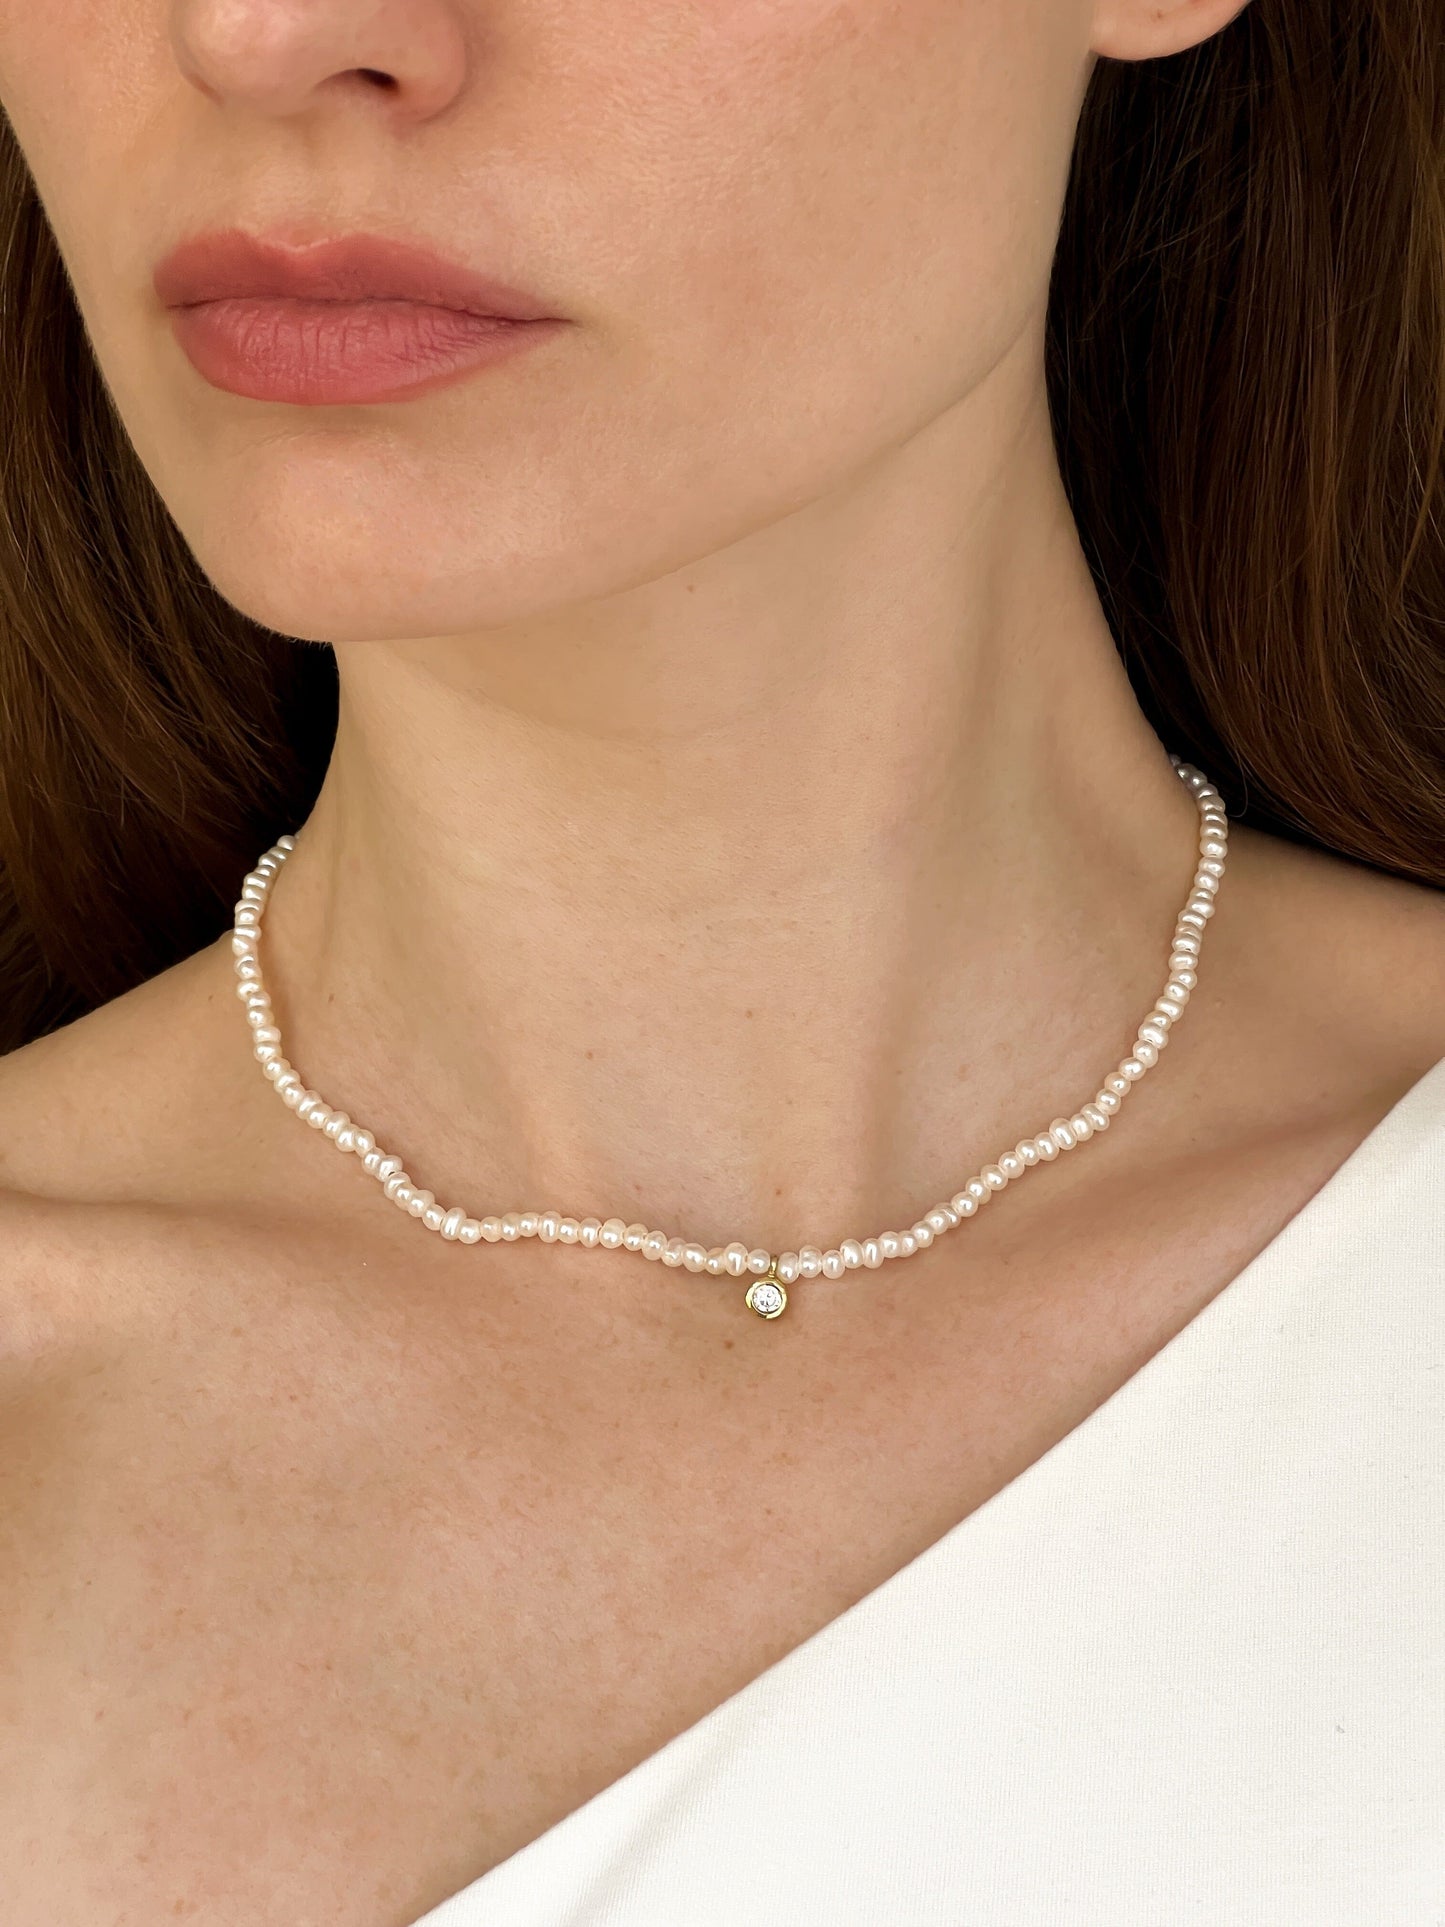 Pearl and Diamond Necklace - 14K White Gold Necklaces magal-dev 